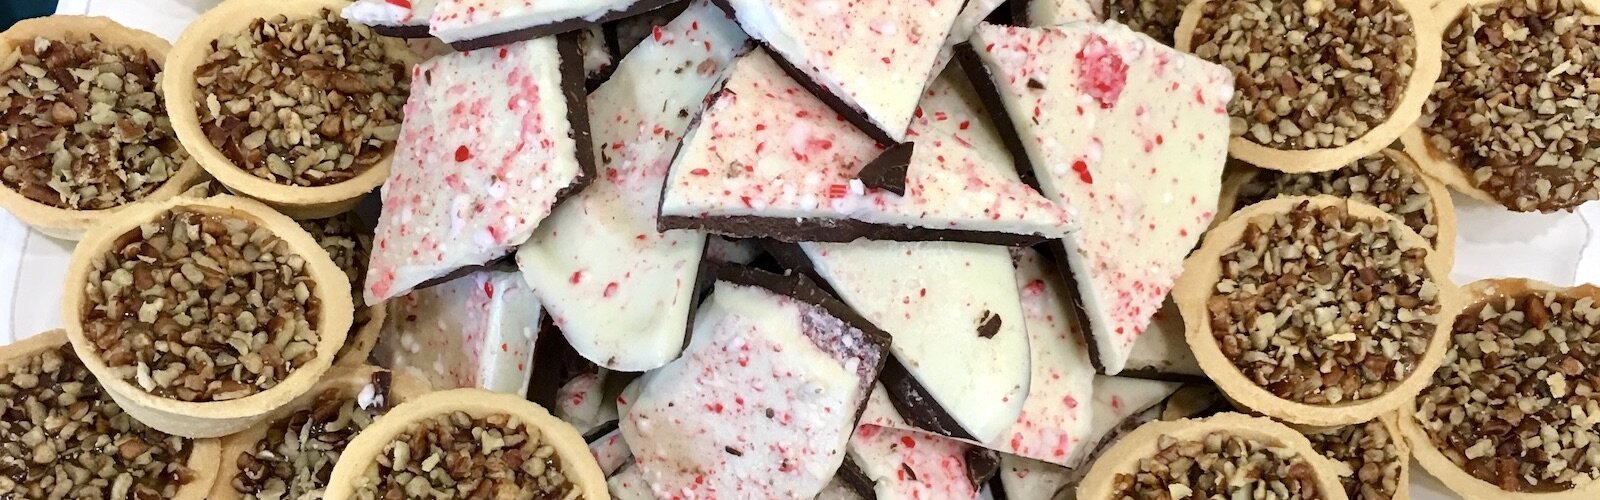 Peppermint bark and pecan tarts.